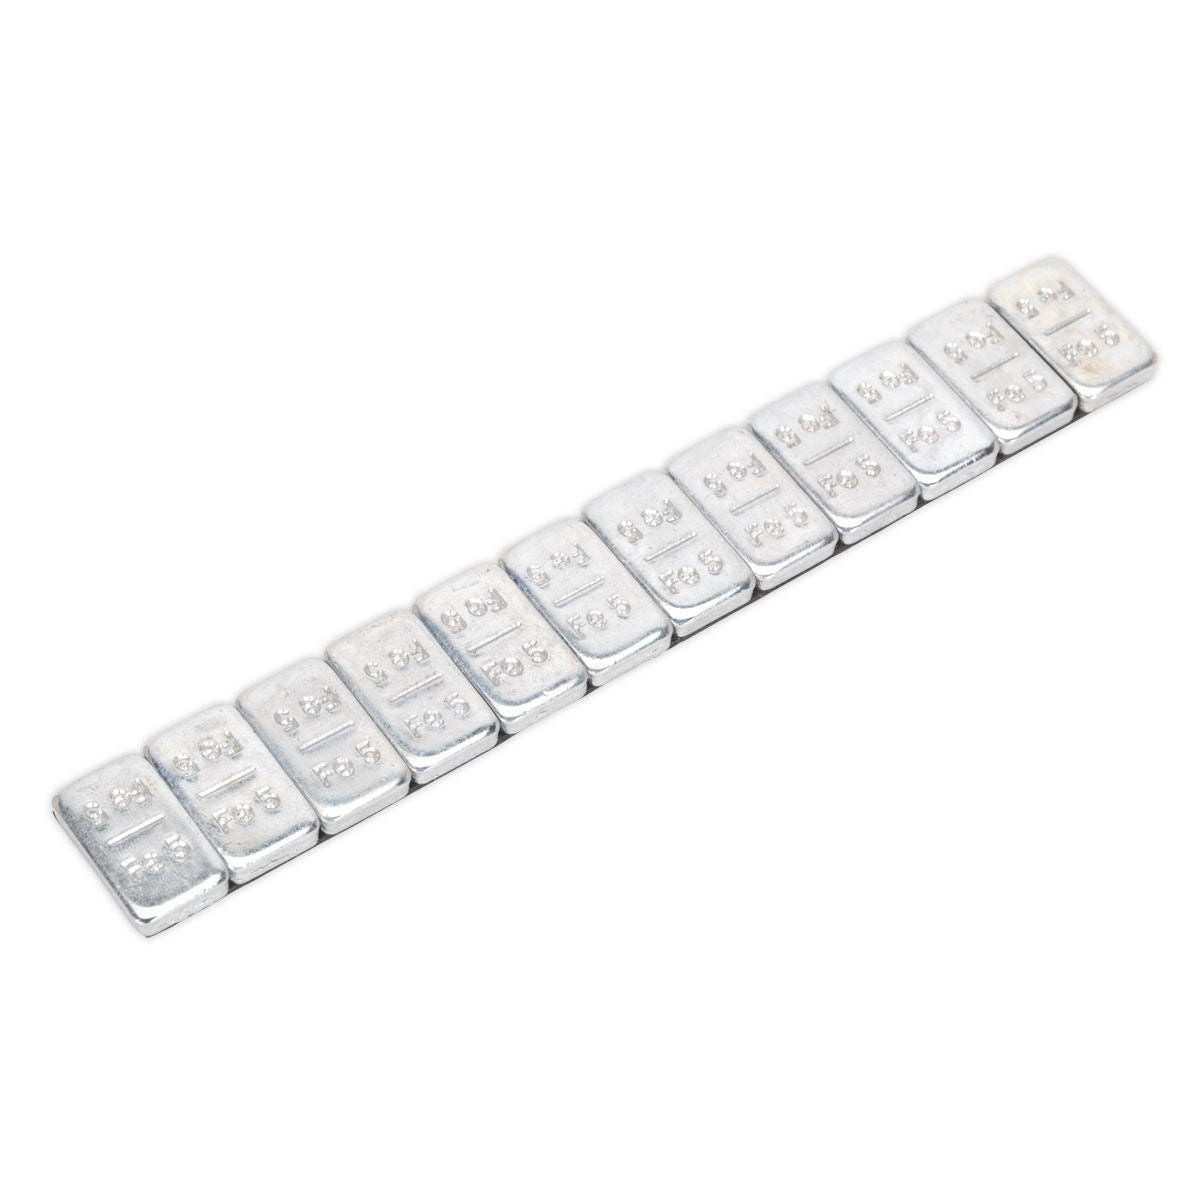 Sealey Wheel Weight 5g Adhesive Zinc Plated Steel Strip of 12 Pack of 100